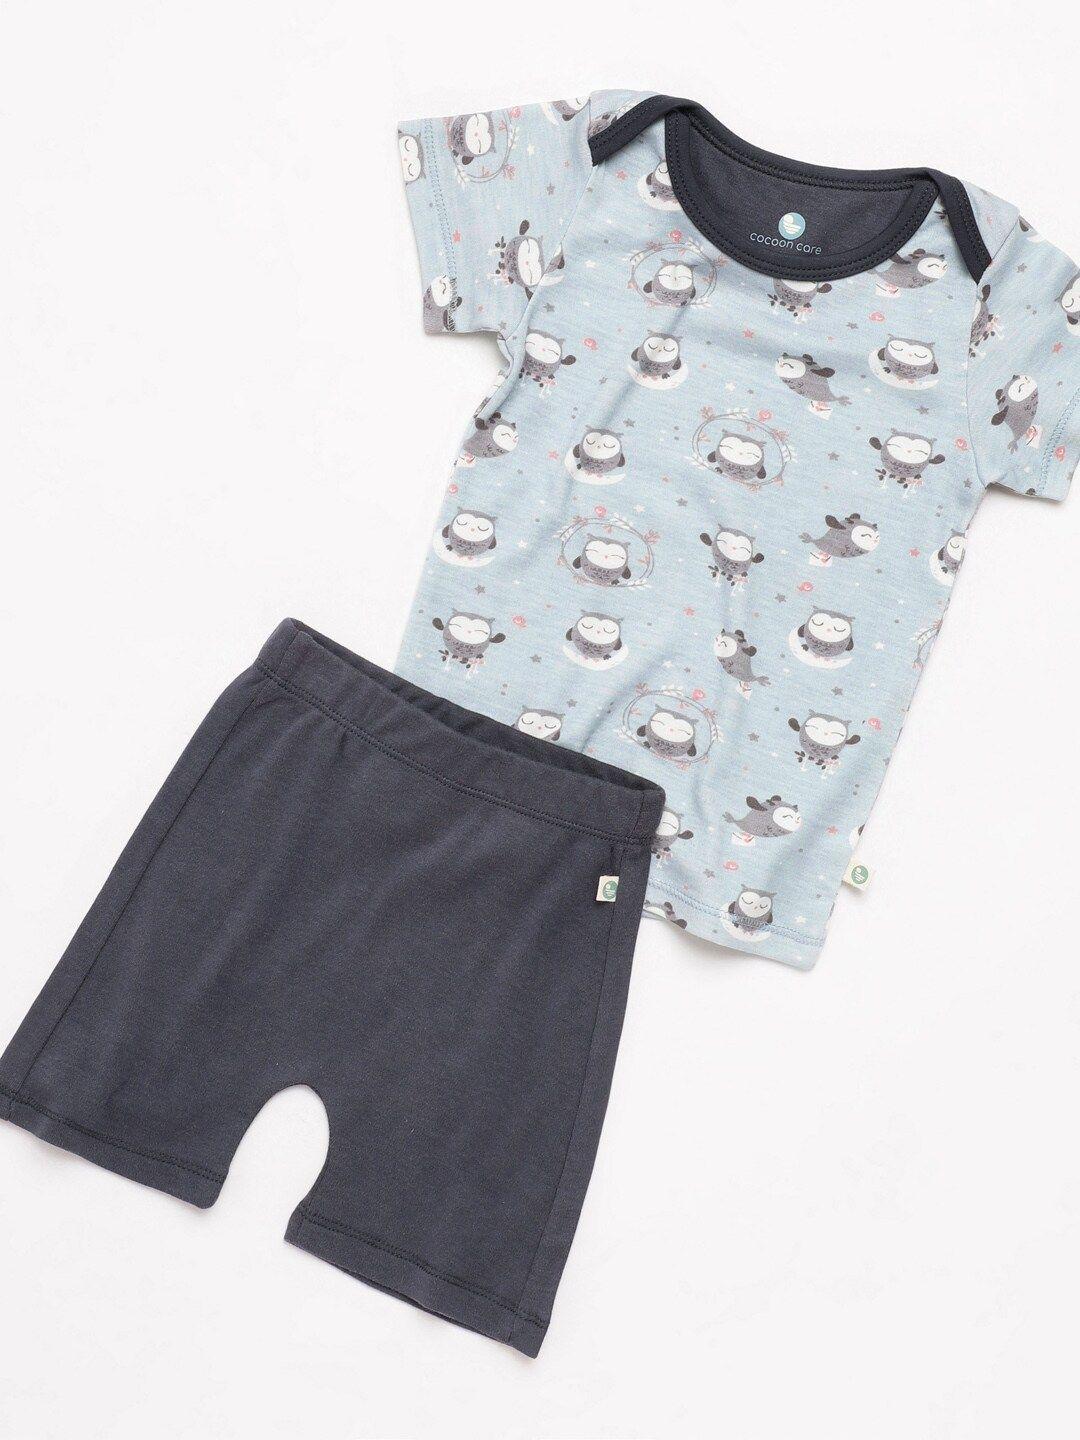 cocoon-care-kids-blue-&-grey-printed-bamboo-t-shirt-with-shorts